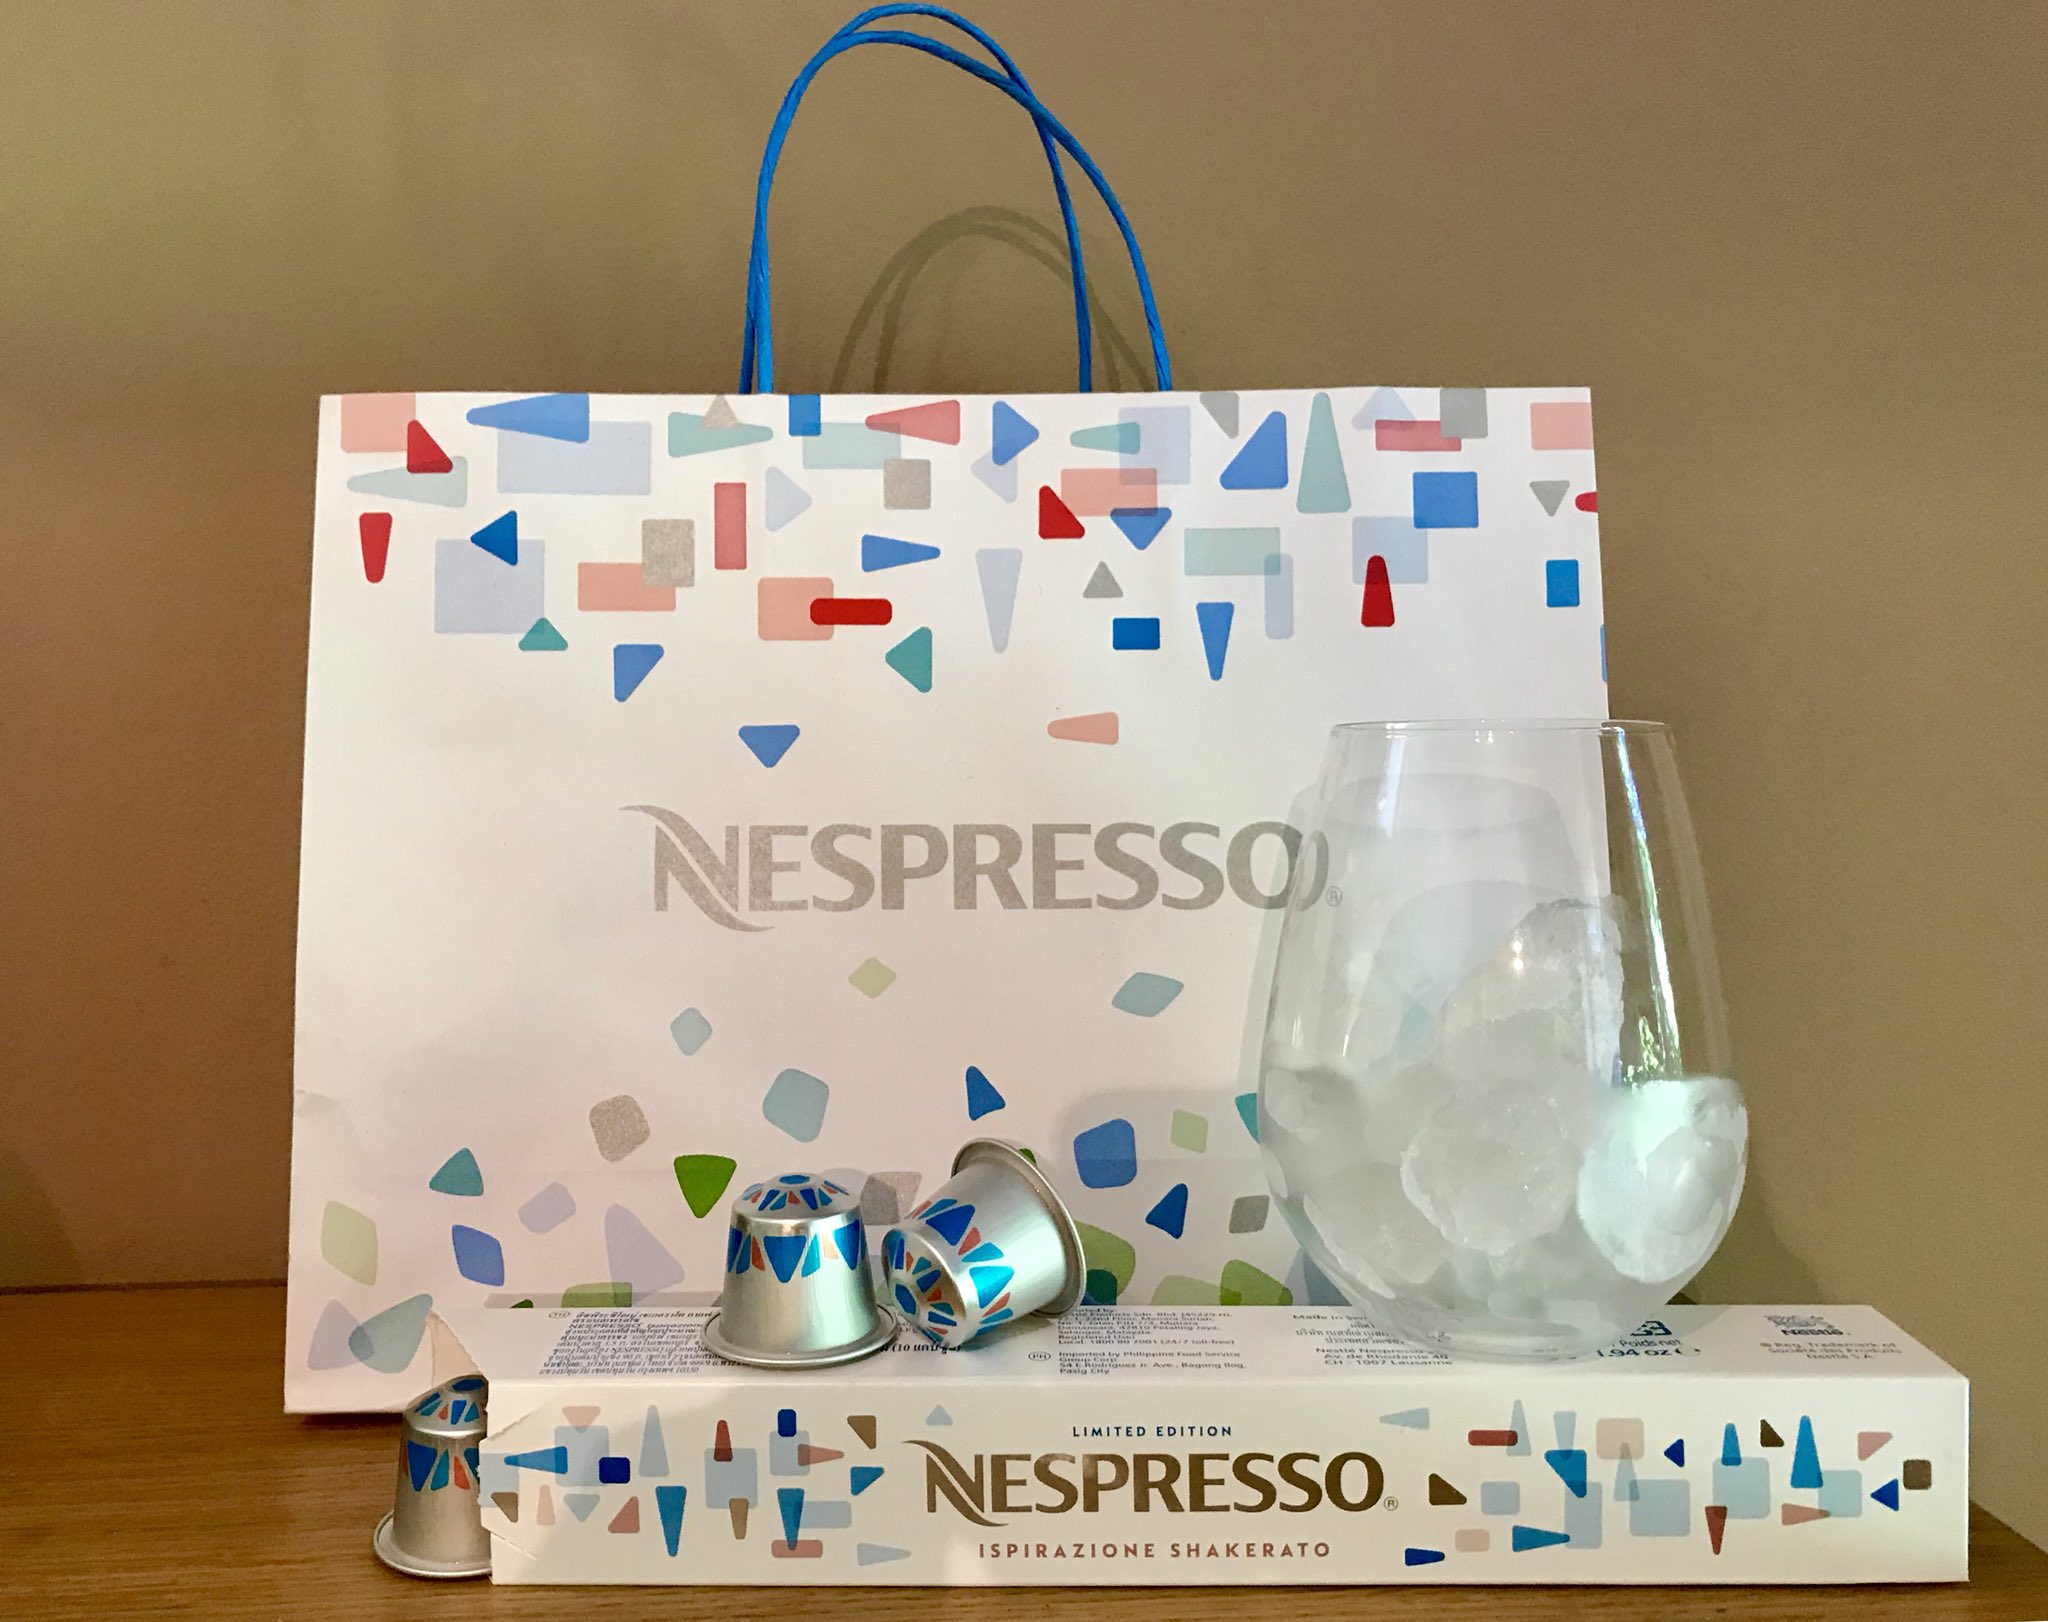 Tøm skraldespanden excitation Flyve drage Well This Is New on Twitter: "Nespresso Iced Coffee Pods! ❄️ @nespressouk # nespresso #icedcoffee #coffeepods #shakerato #shakeratocaffe #coffee  #limitededition #wellthisisnew https://t.co/M6R89KXhj1" / Twitter